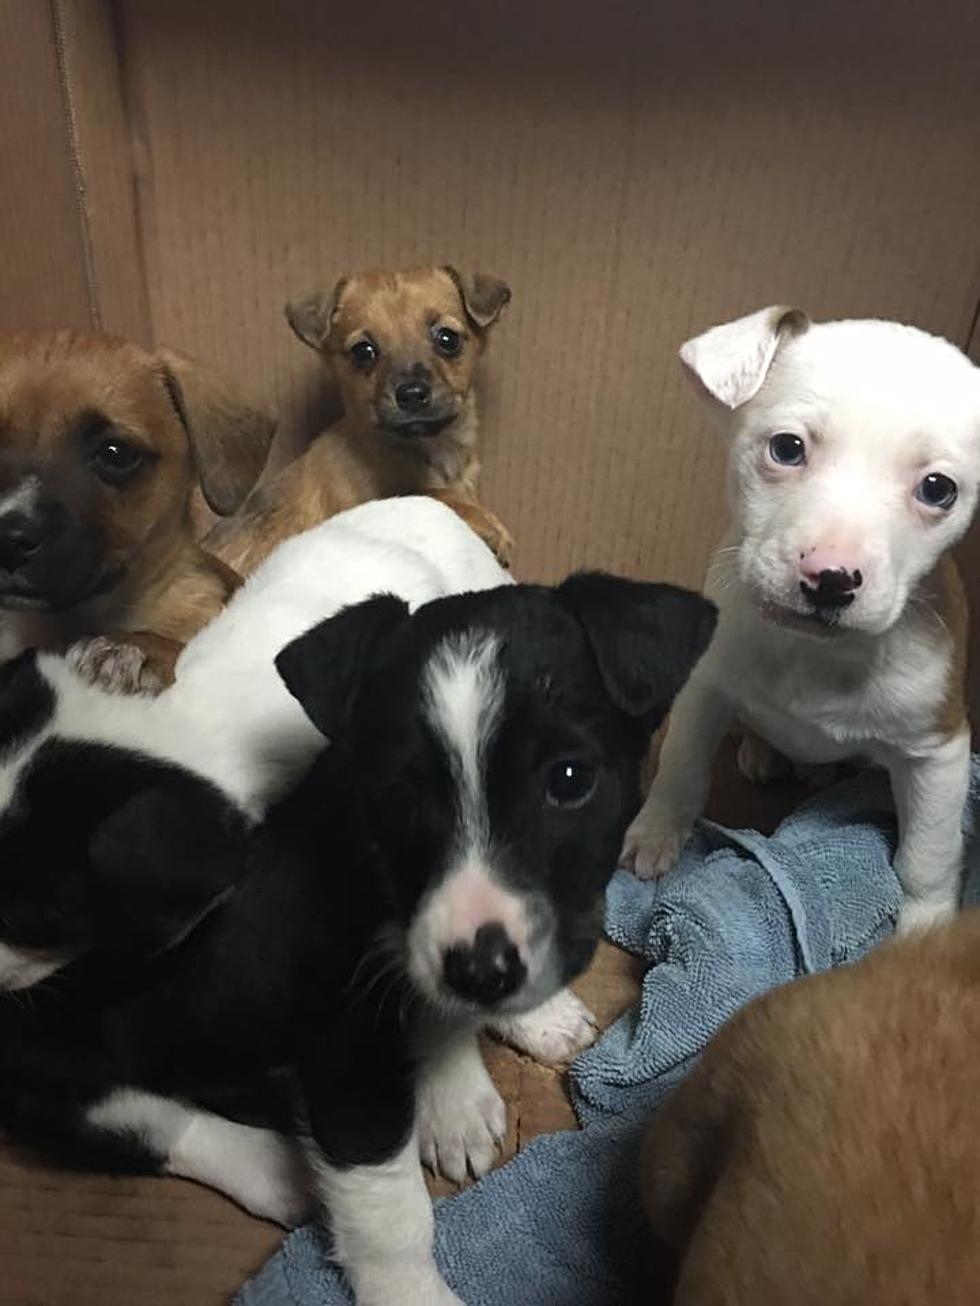 Oklahoma Puppies Found Abandoned in a Box Near City Park